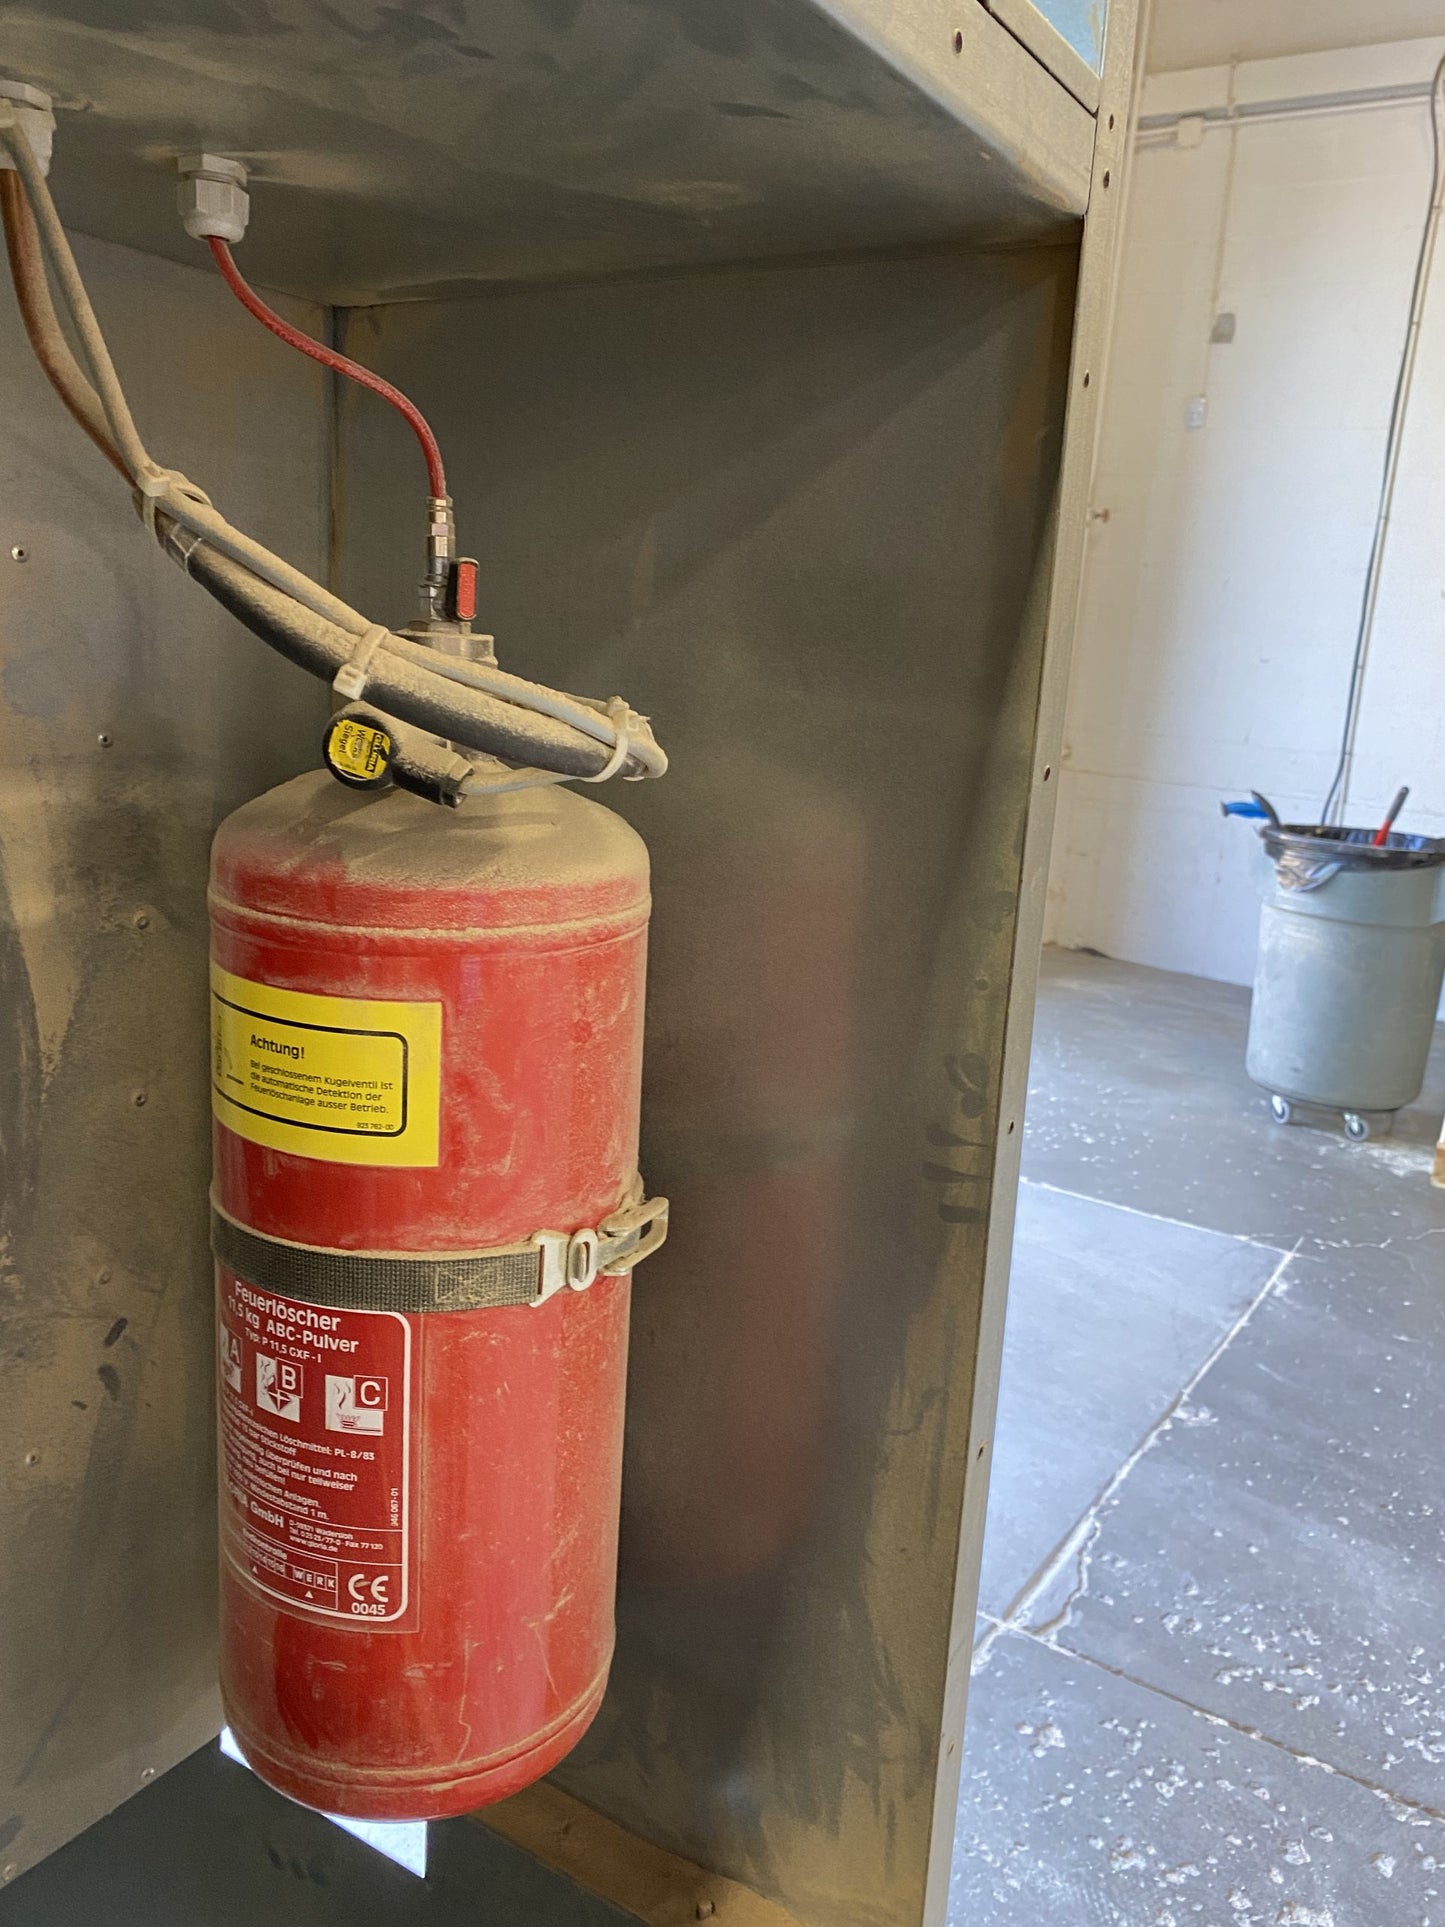 Felder Dust Collectors with Dump Bins and Fire Suppression – 2 AVAILABLE!